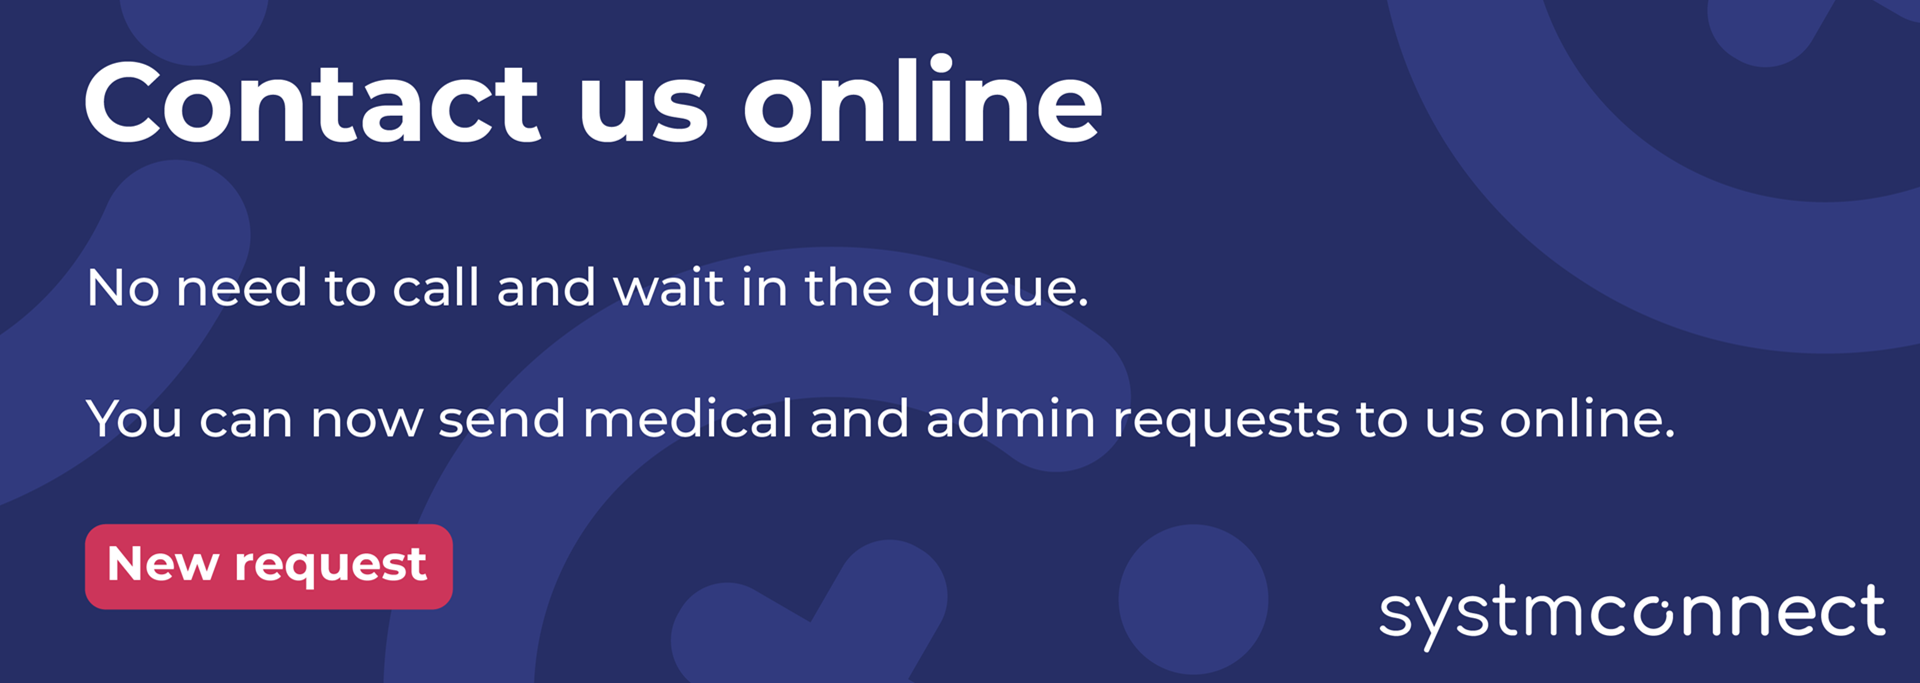 contact us online.  No need to call and wait in the queue, you can now send medical and admin requests to us online.  New request button highlighted in red